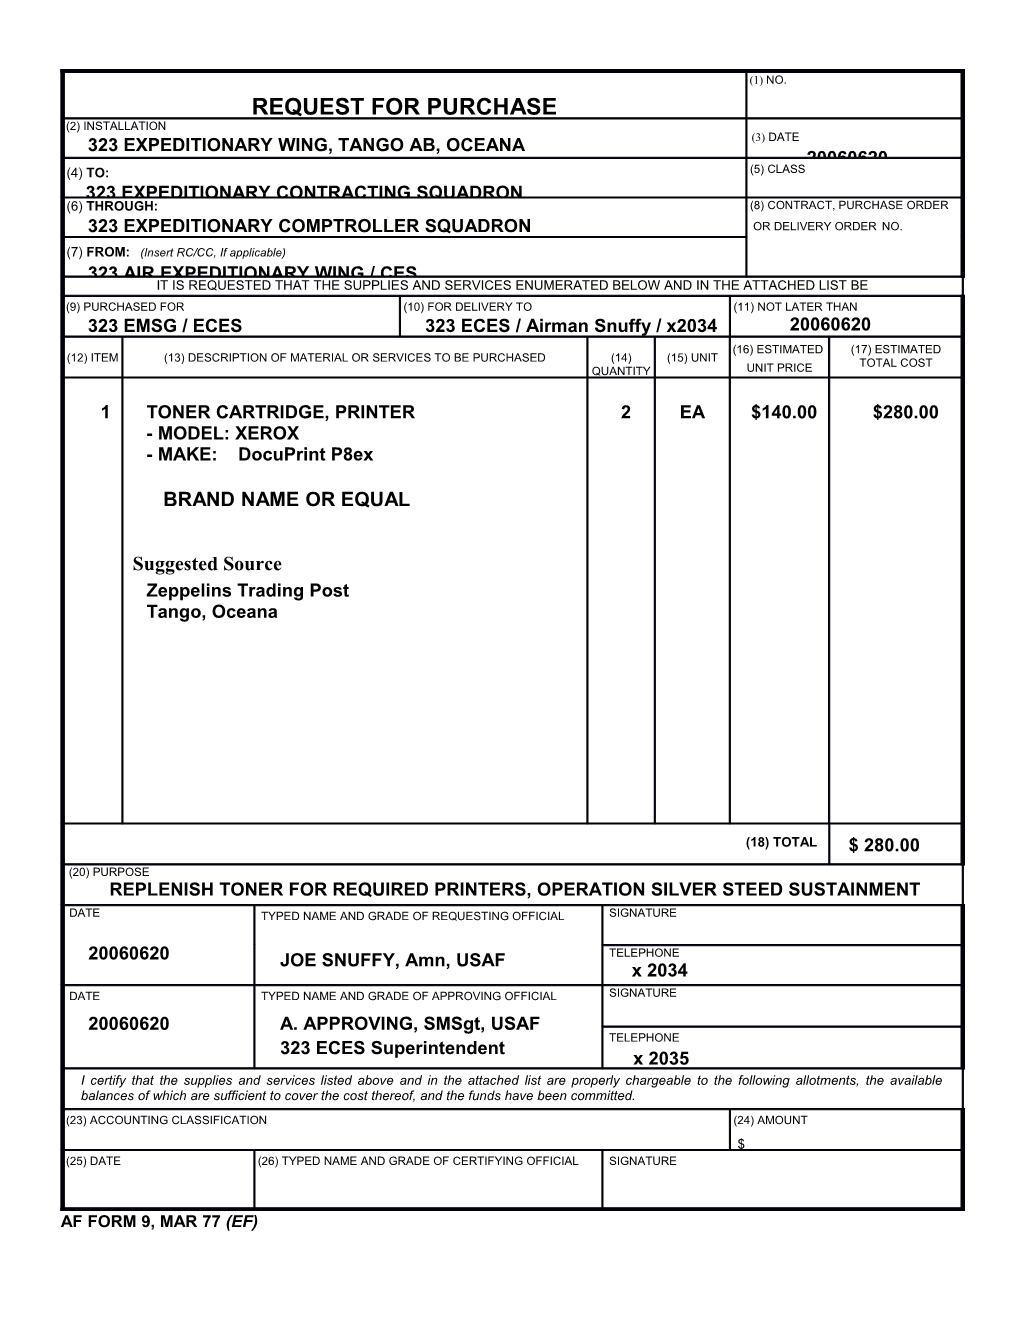 Purchase Request (Air Force Form 9)